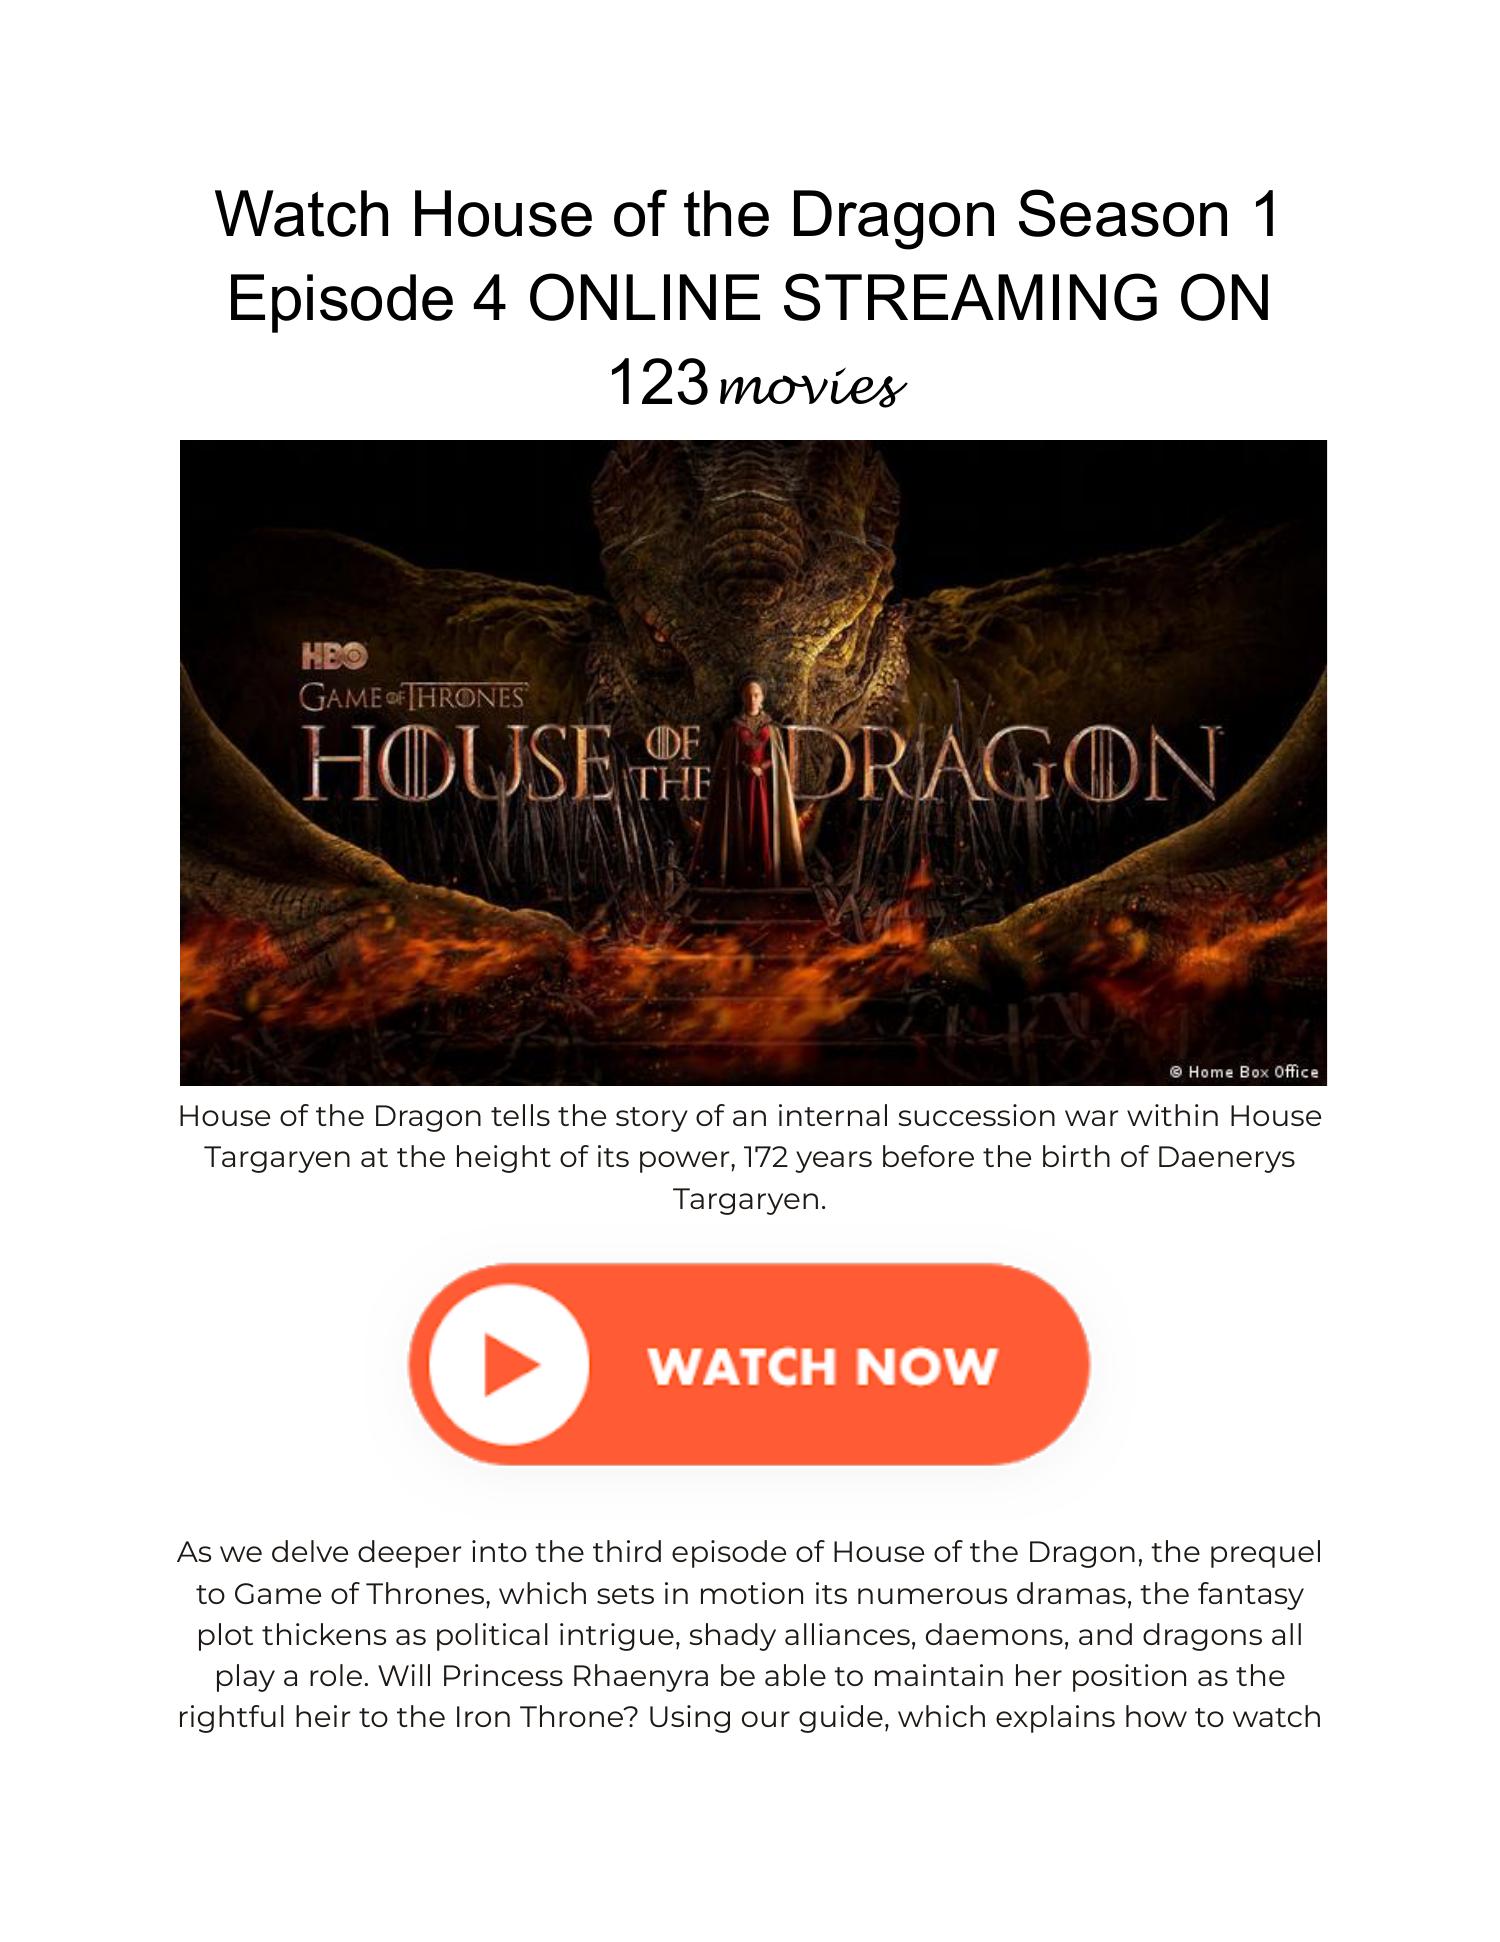 How to Watch House of the Dragon [House Targaryen Online]